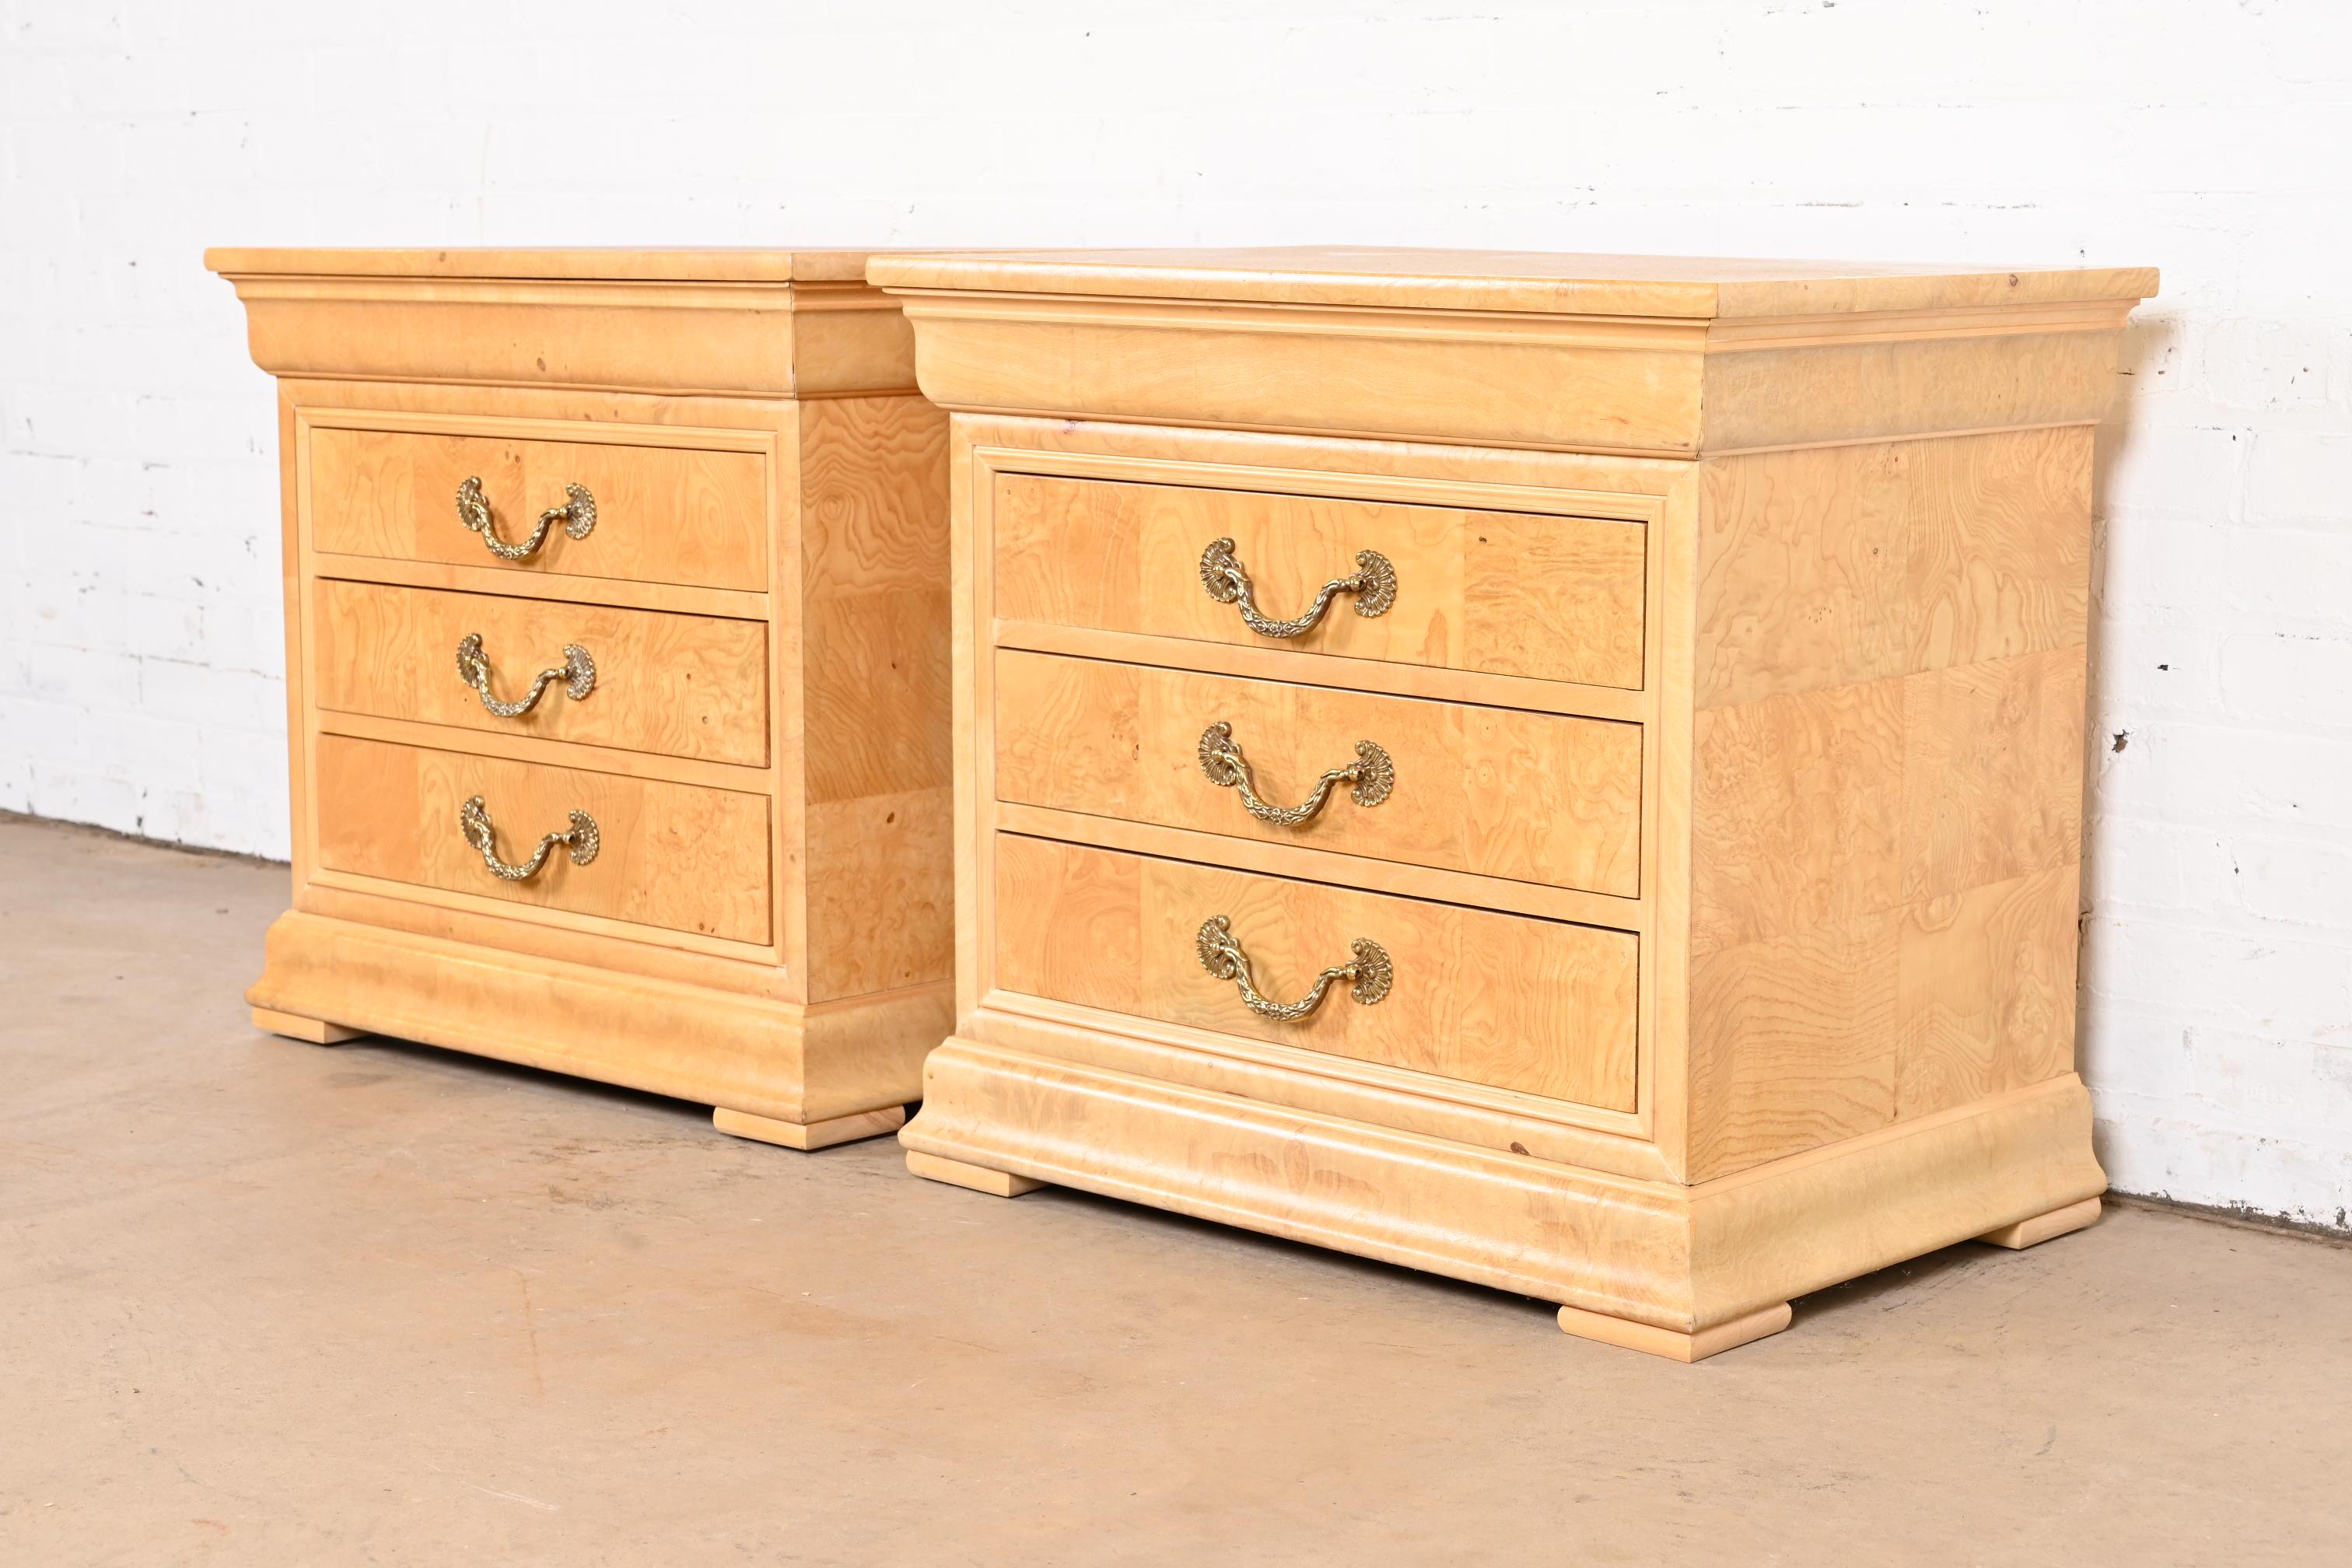 An exceptional pair of French Regency or Louis Philippe style chests of drawers or nightstands

By Henredon, 